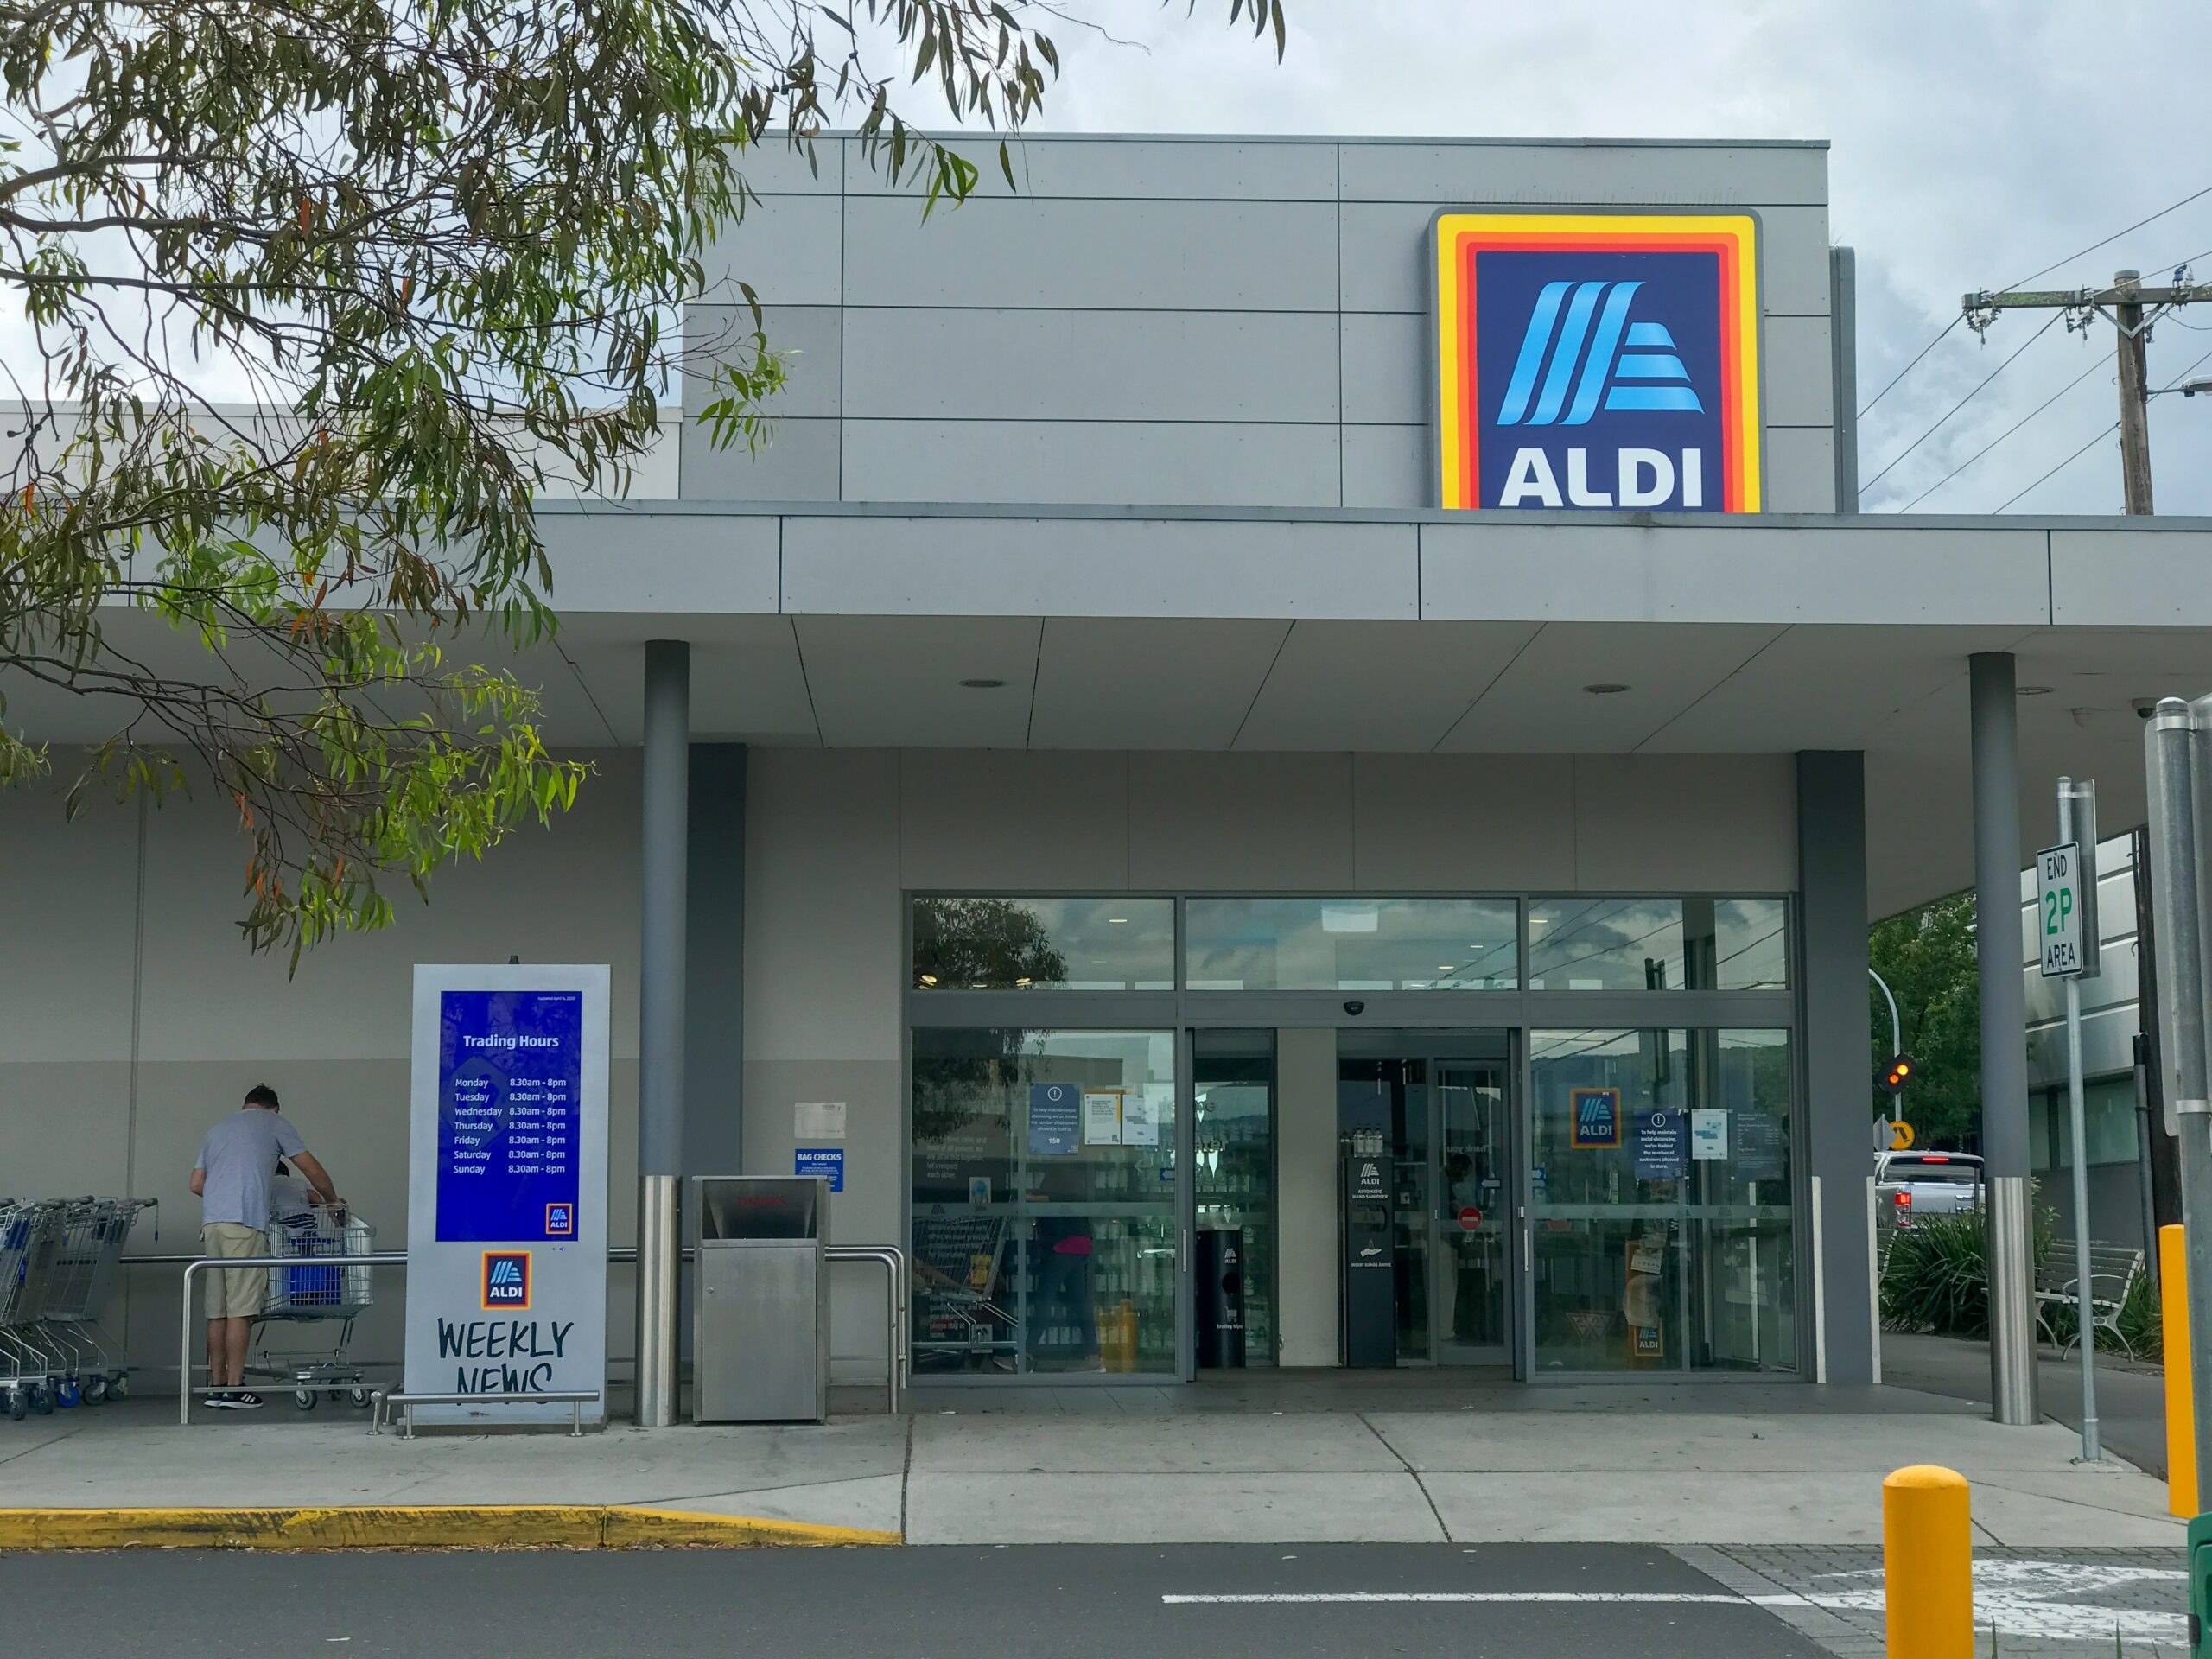 Does Aldi pay you every week?